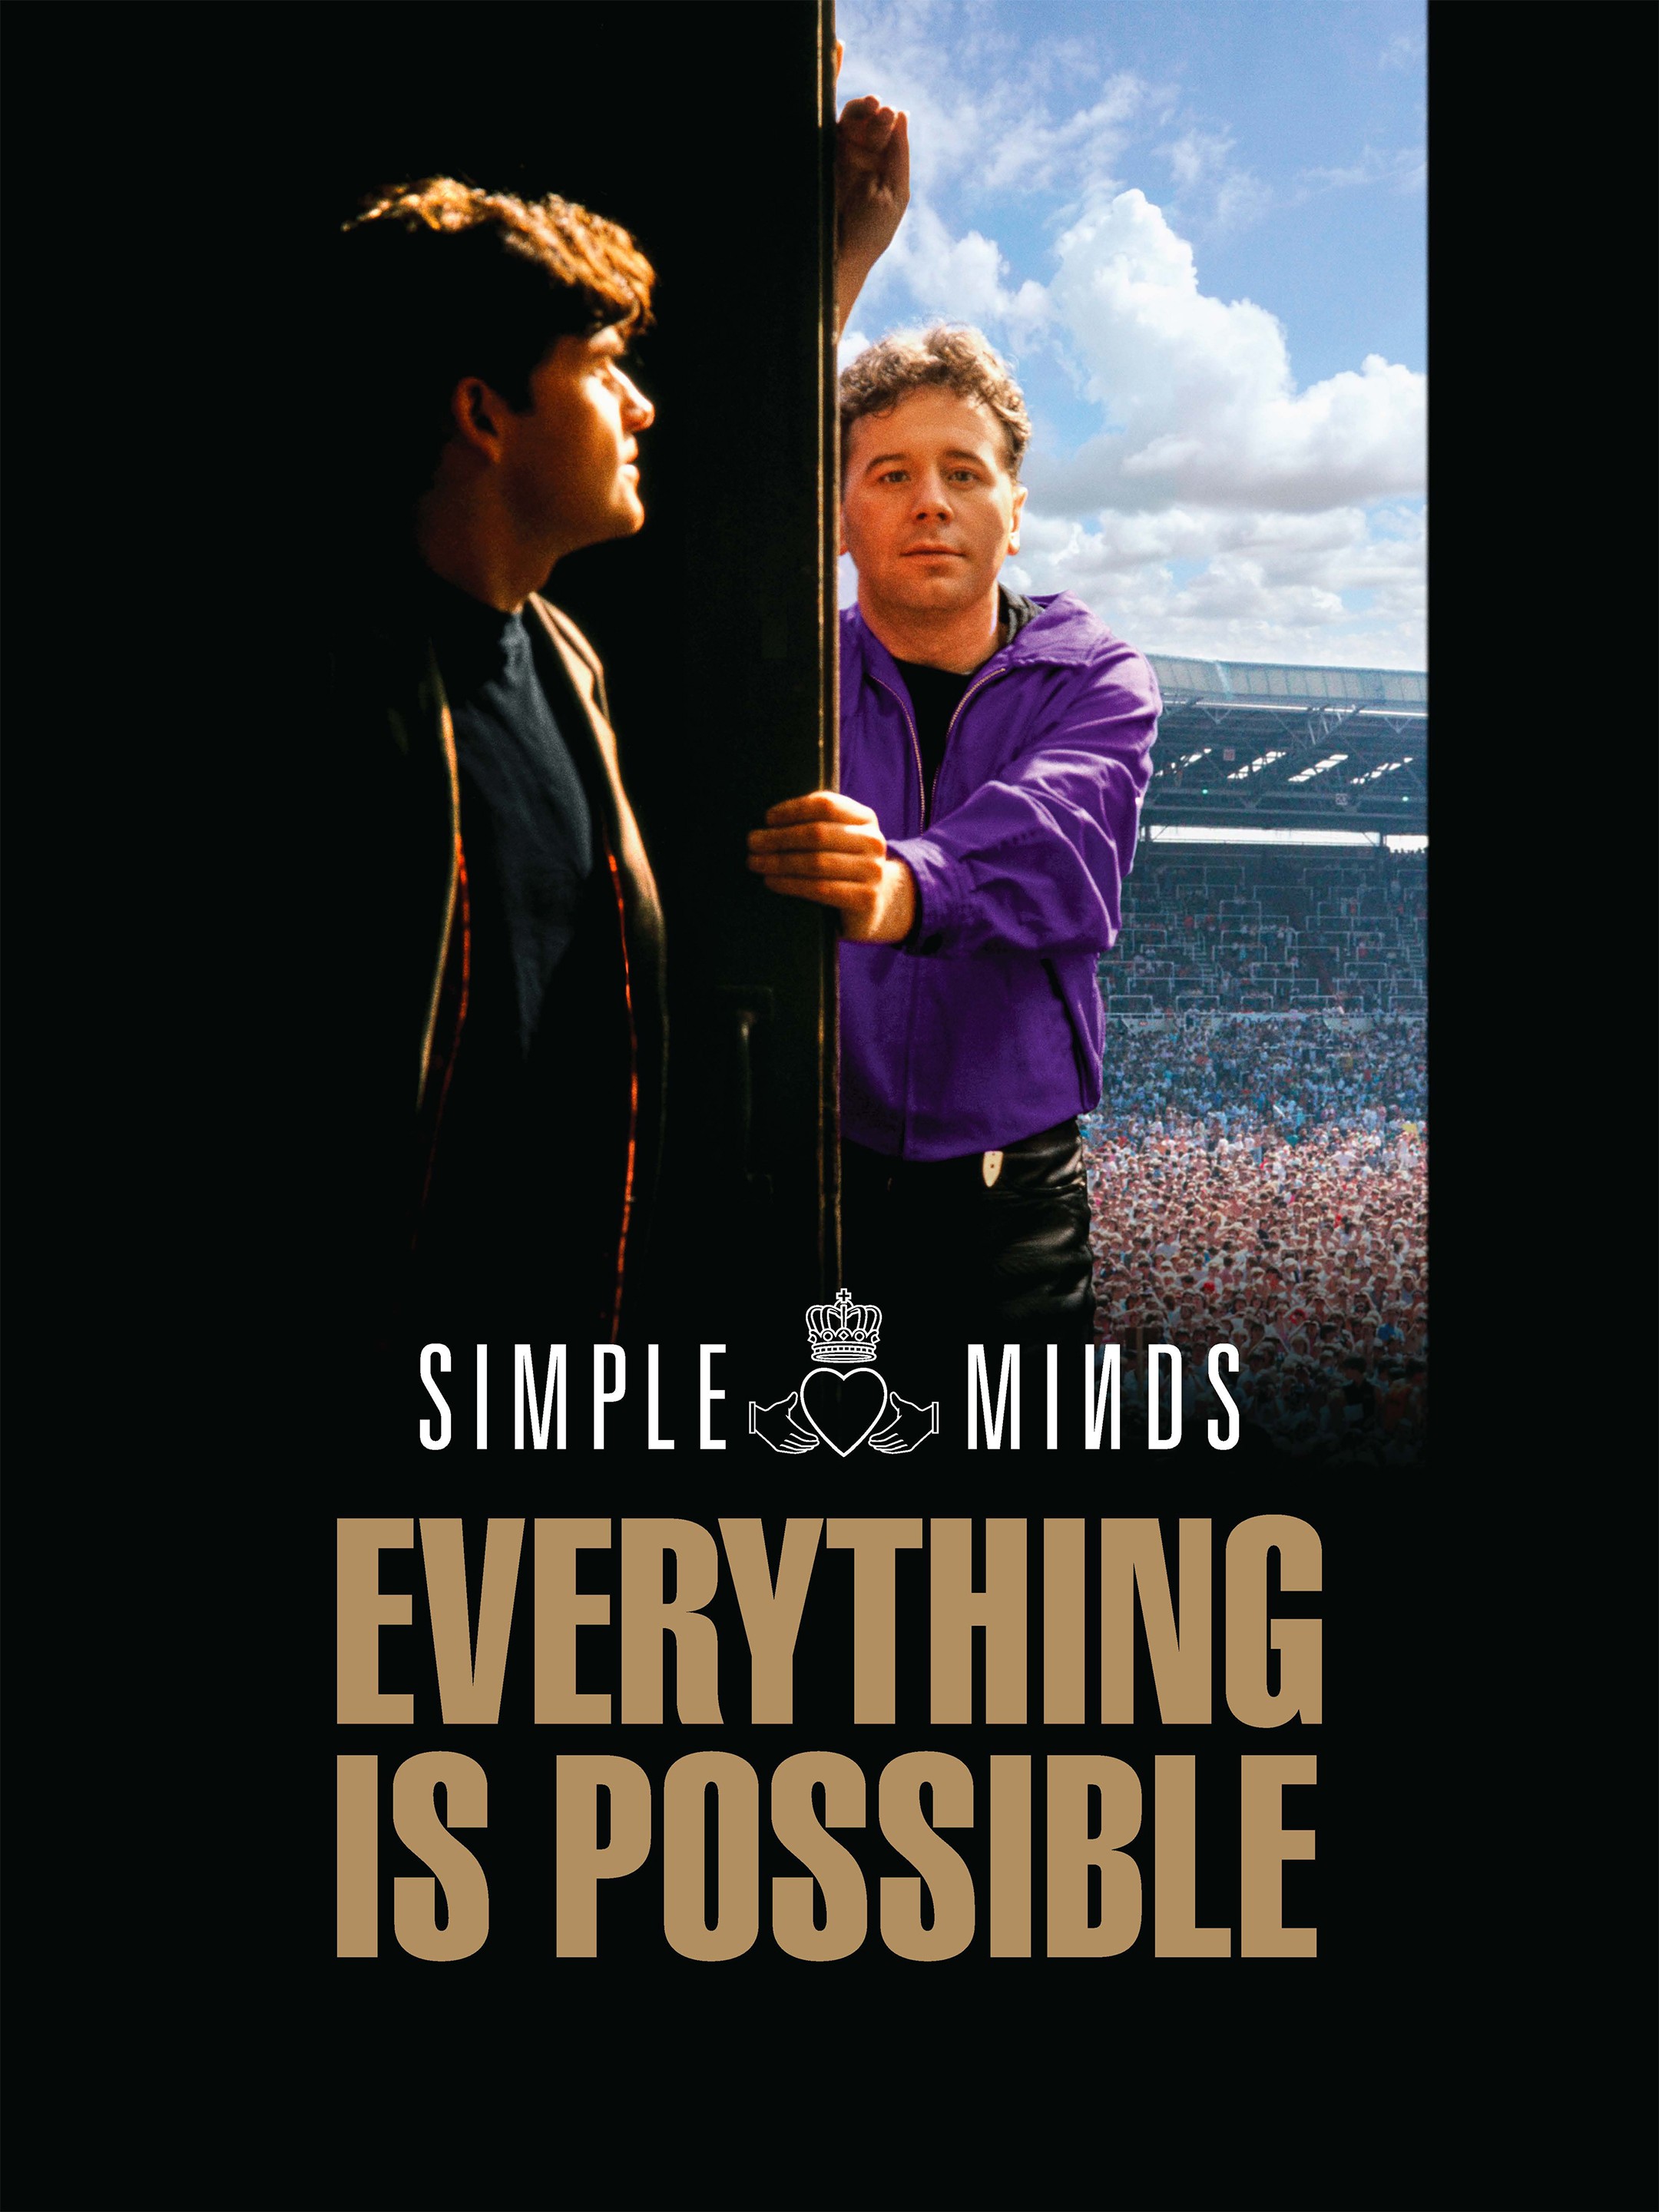 Simple Minds: Everything Is Possible review – a straightforward portrait of  unpretentious rockers, Movies